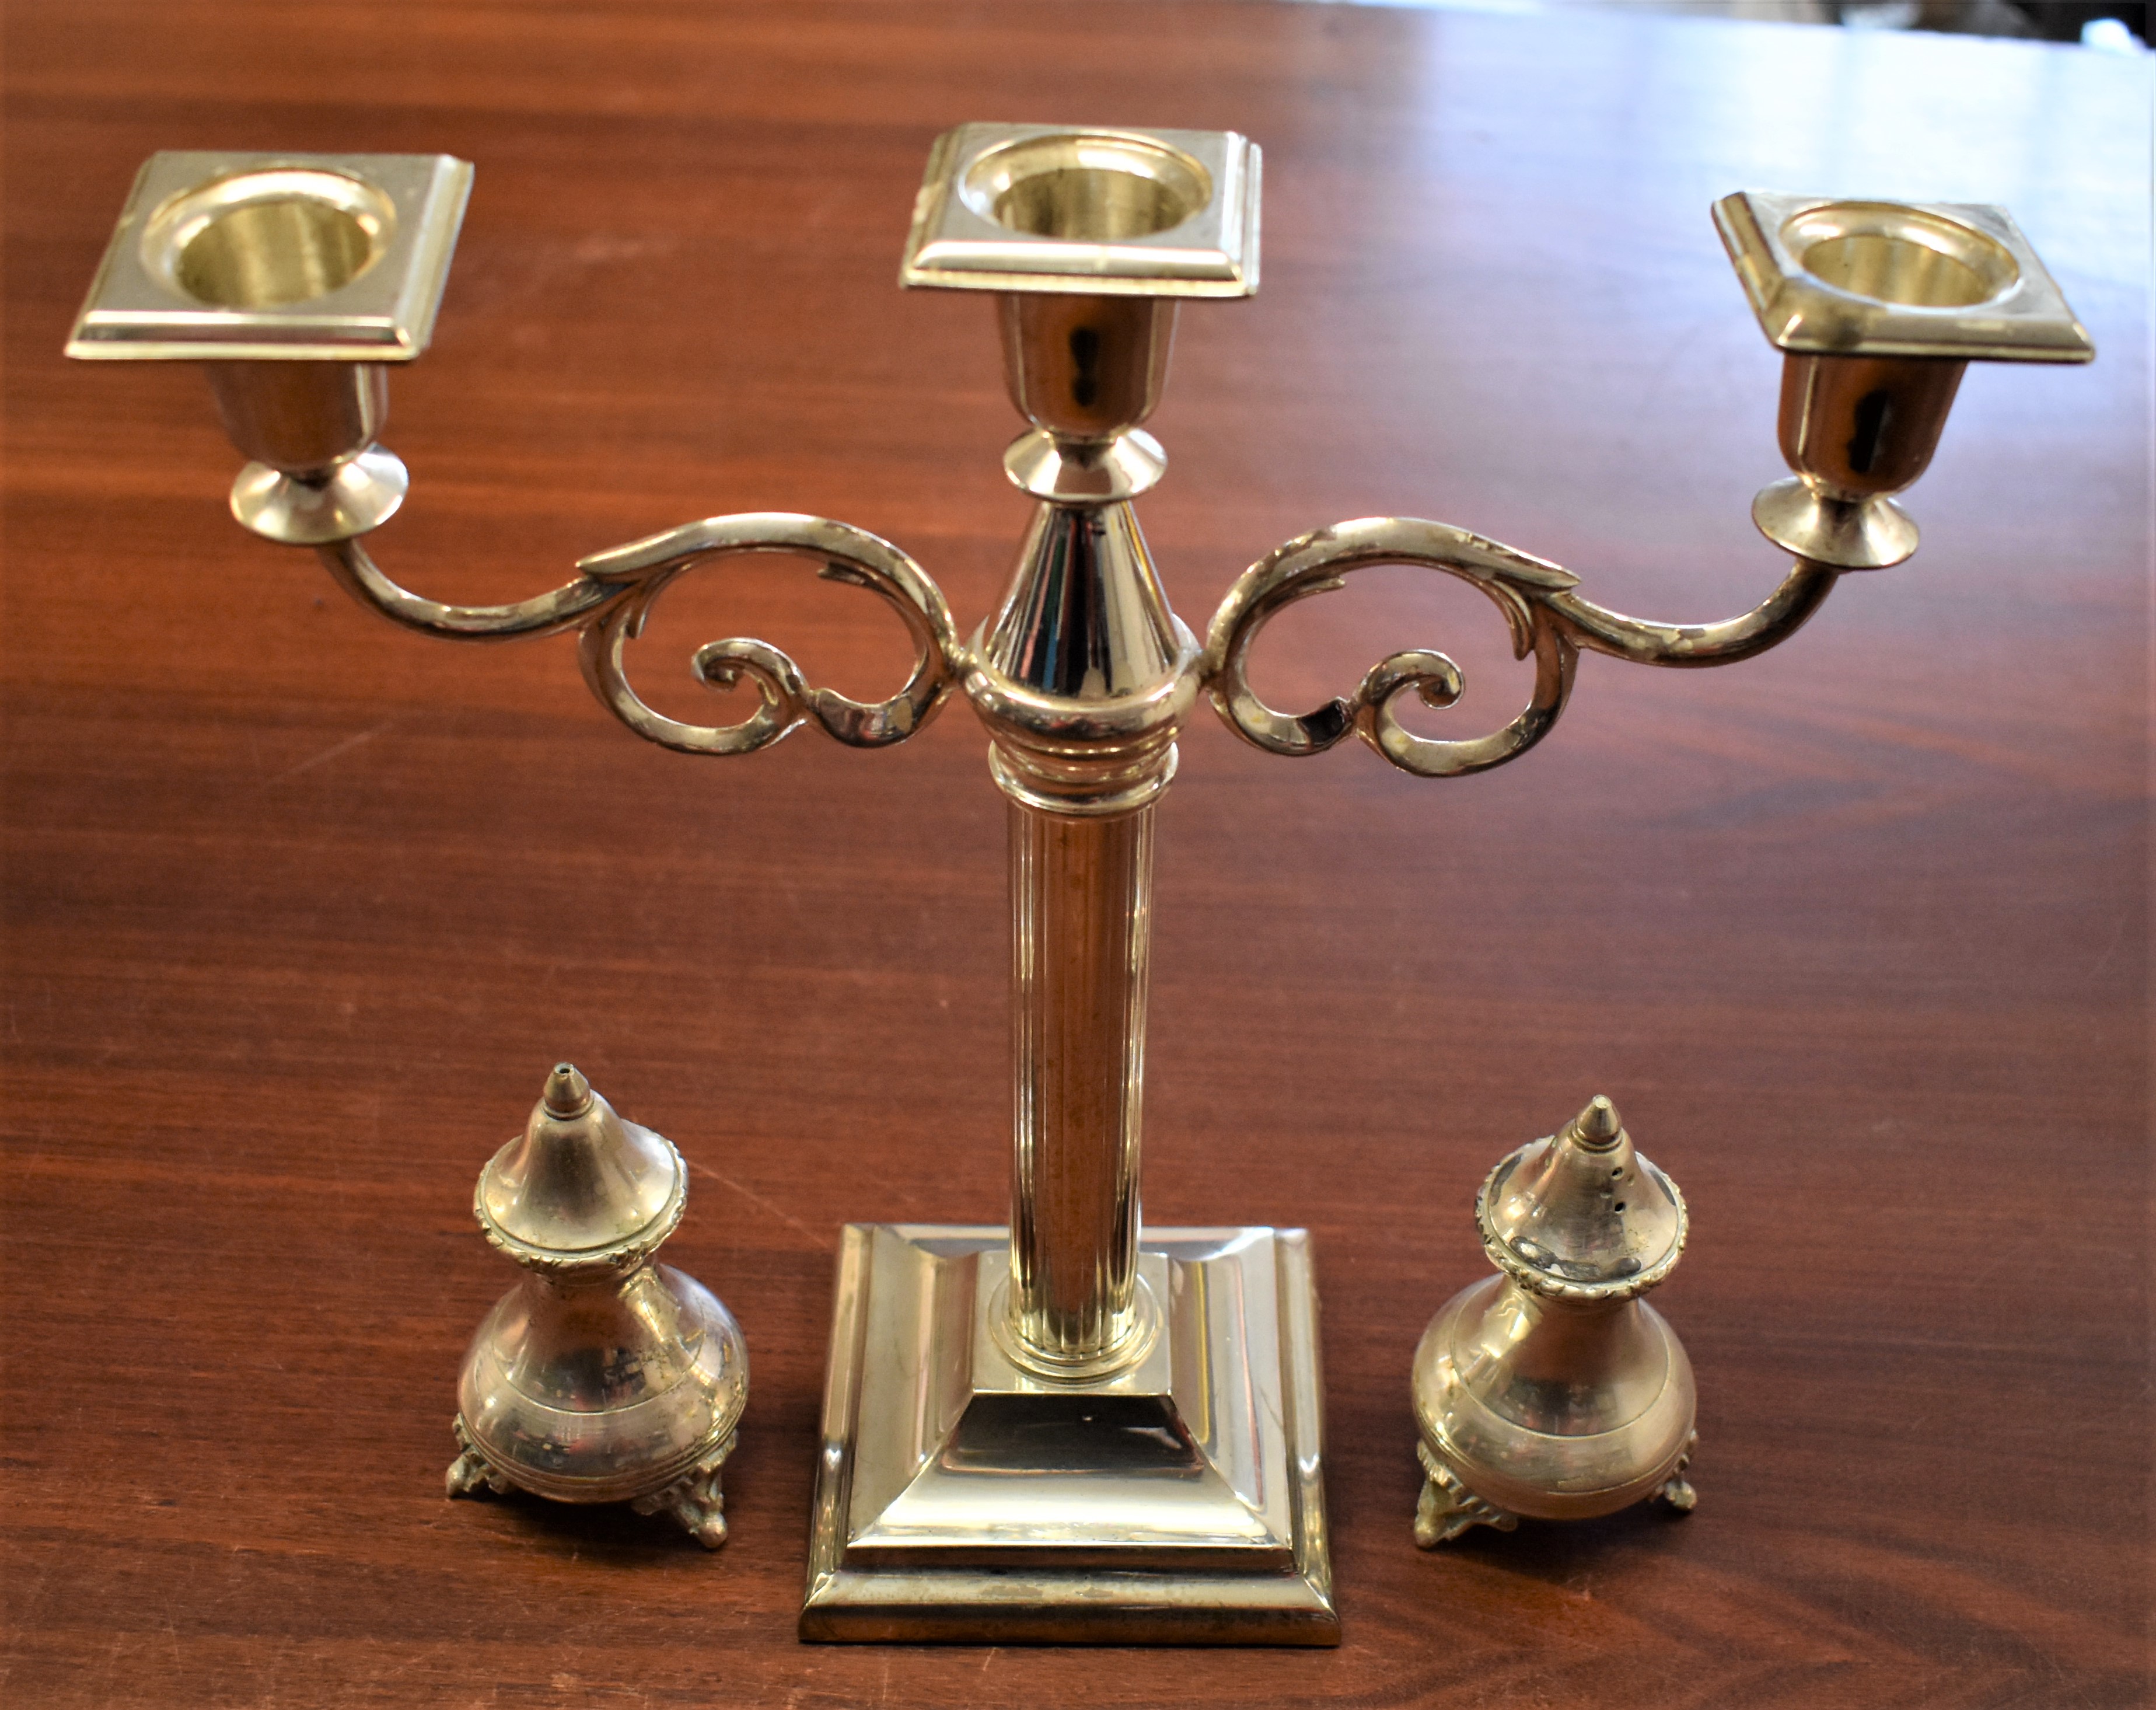 Vintage Silver Plated Candlestick and Salt and Pepper Shakers, nice little lot